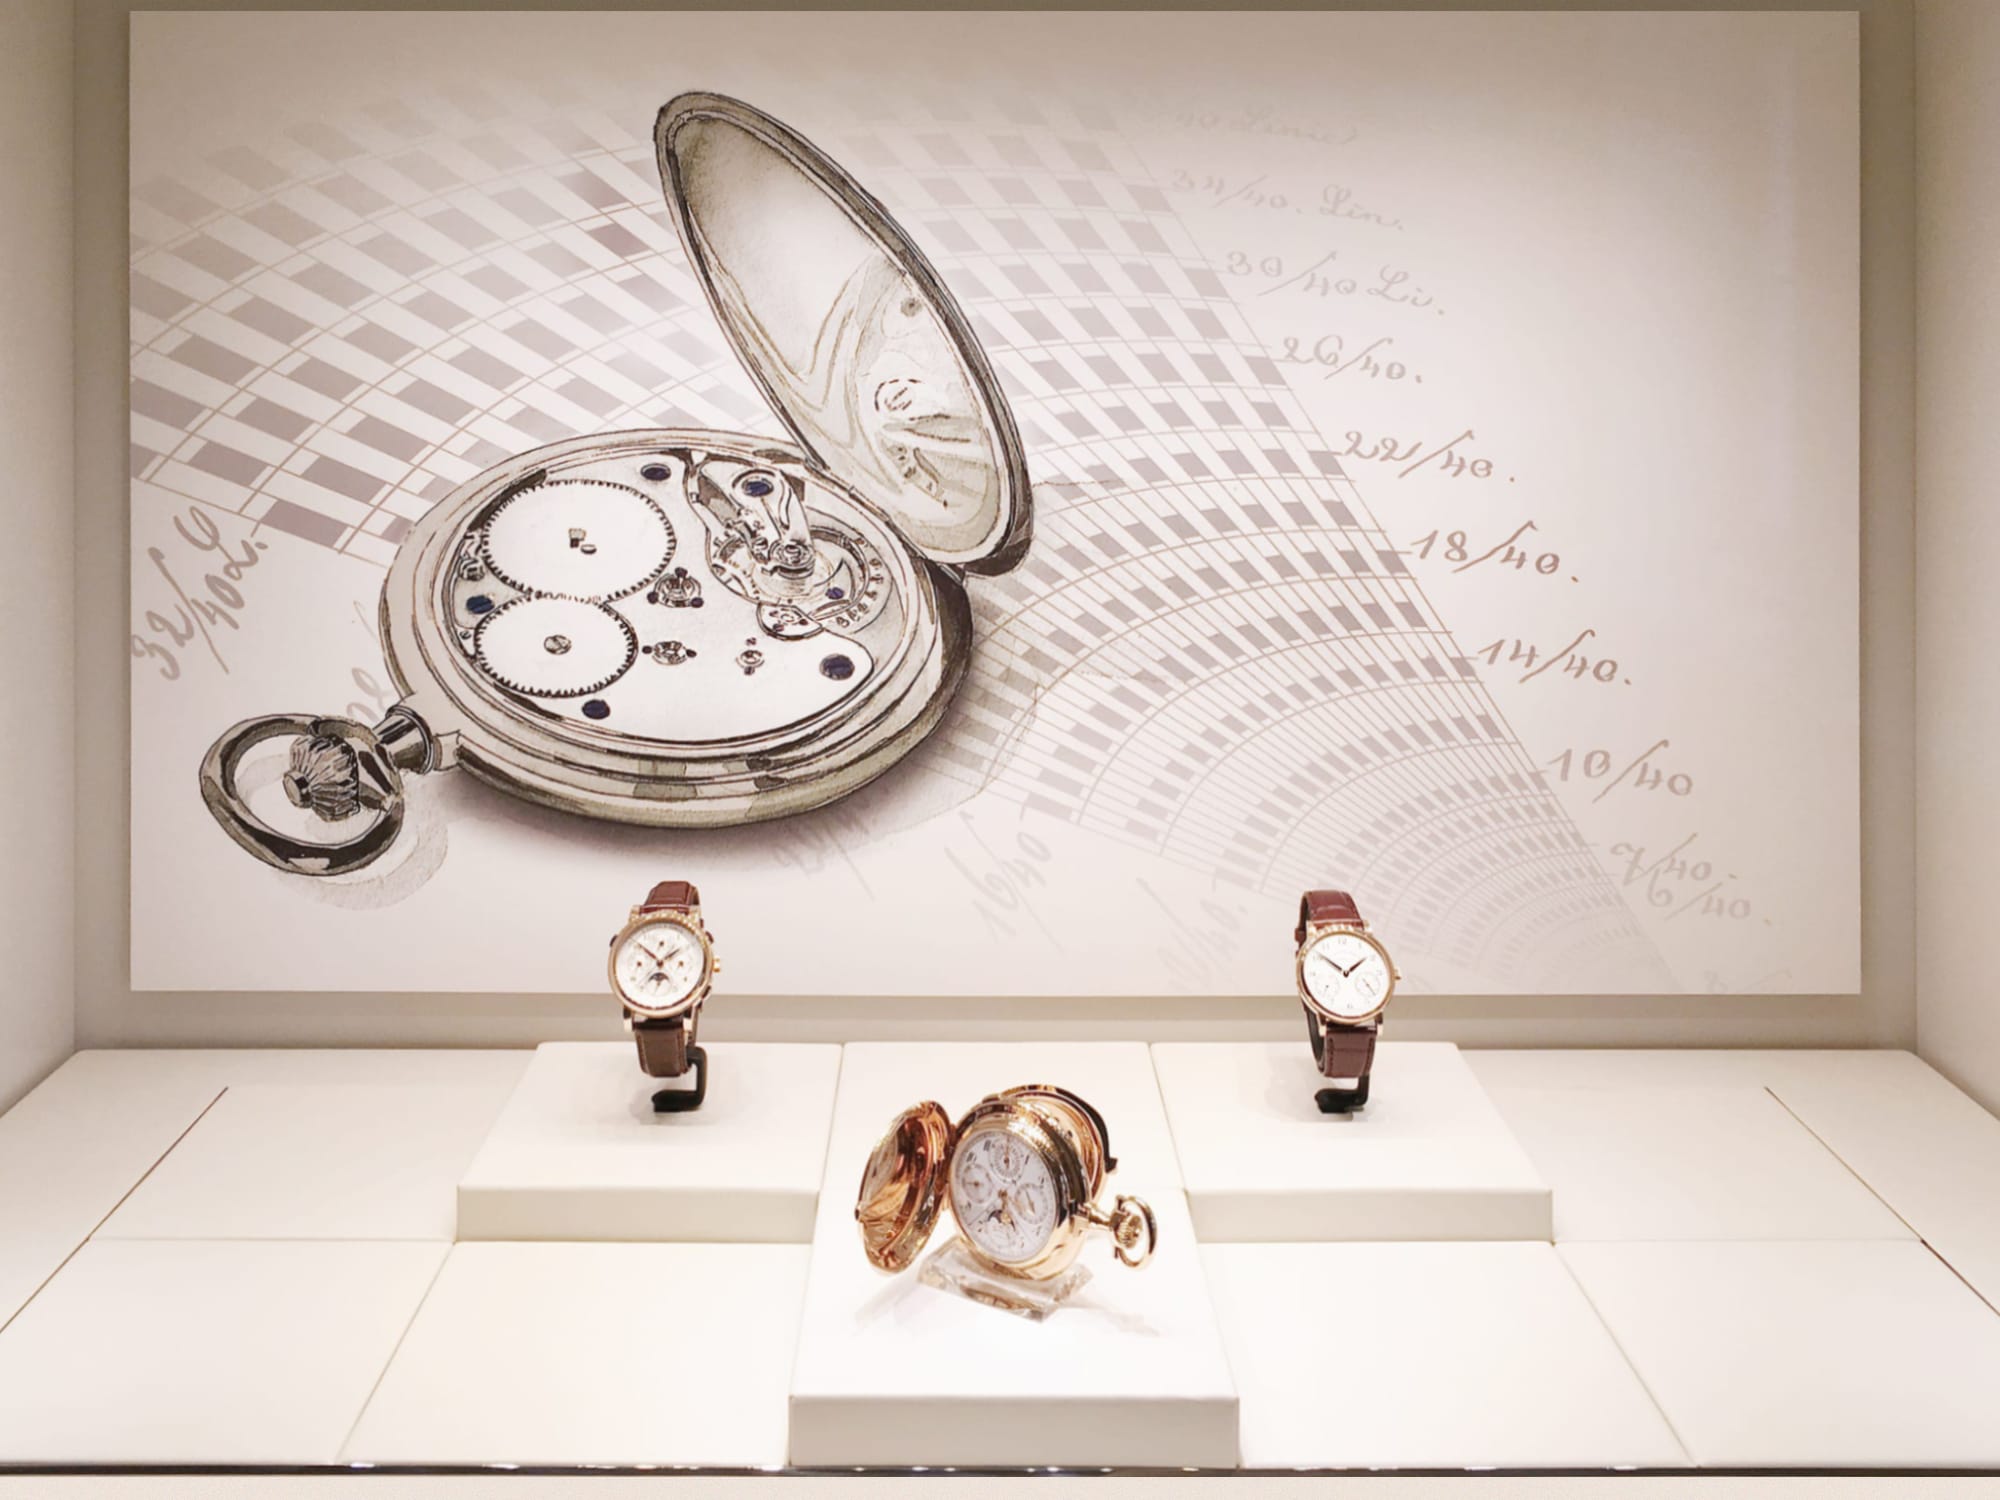 A. Lange und Söhne shop window with watch model in the center and bright plain background